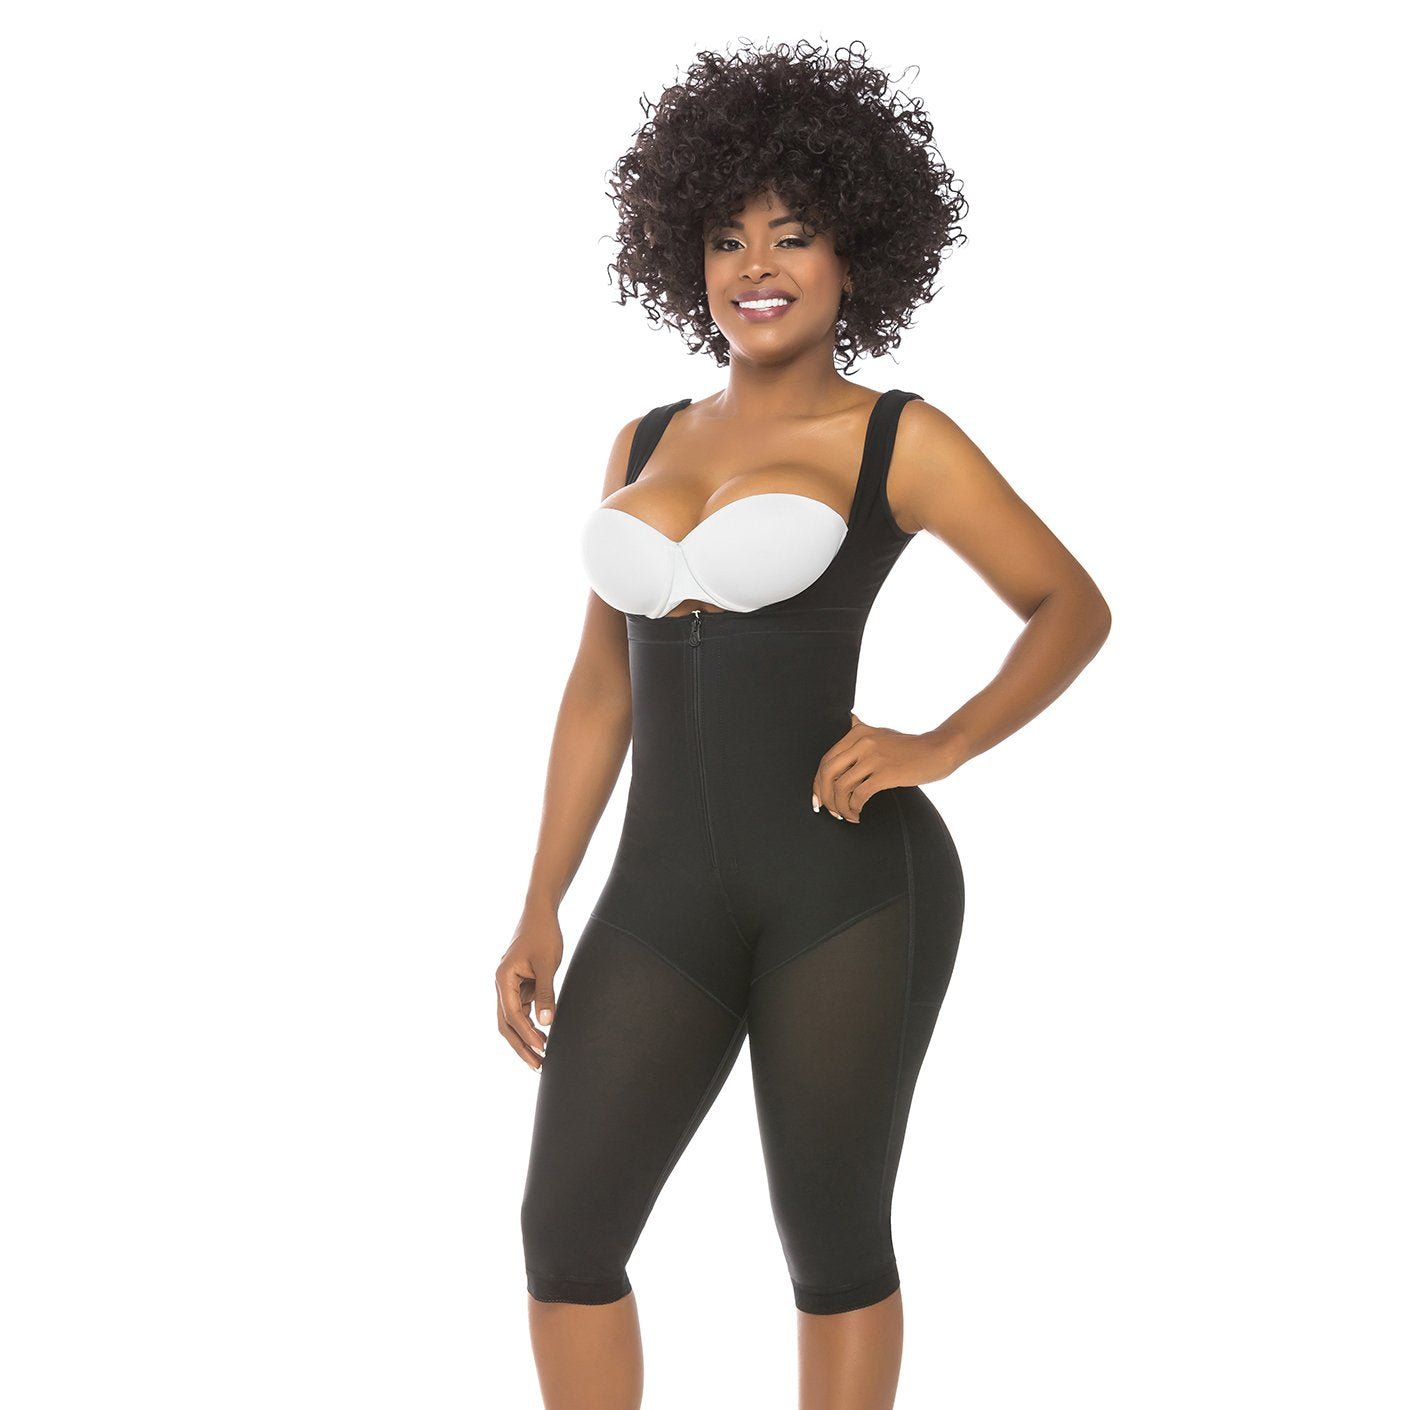 Salome Butt Lift Girdle 0520  Colombian Shapewear and More – Fantasy  Lingerie NYC